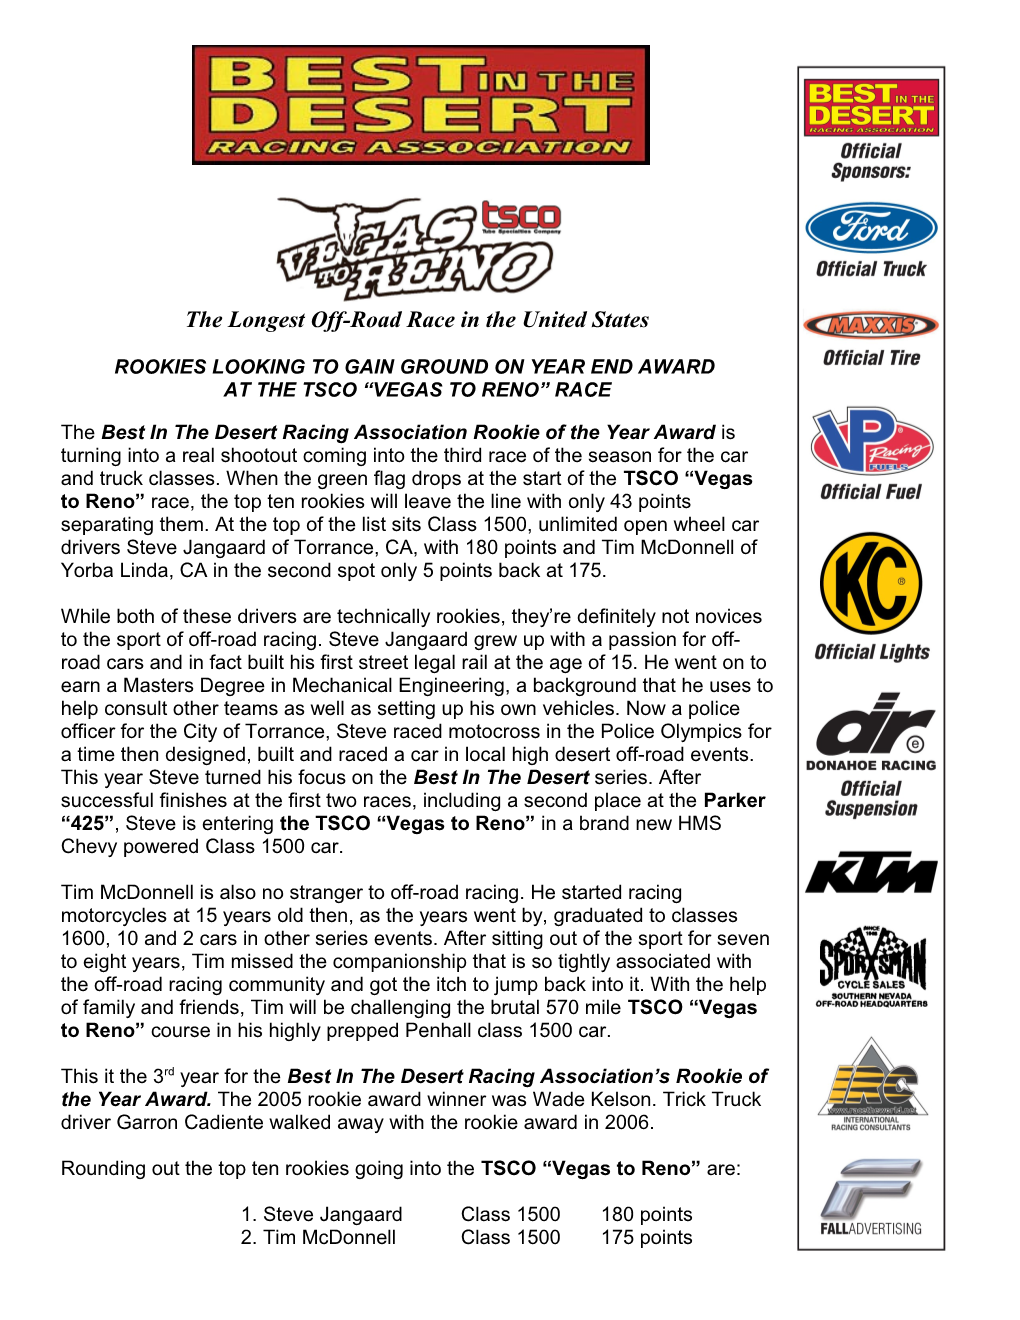 The Longest Off-Road Race in the United States